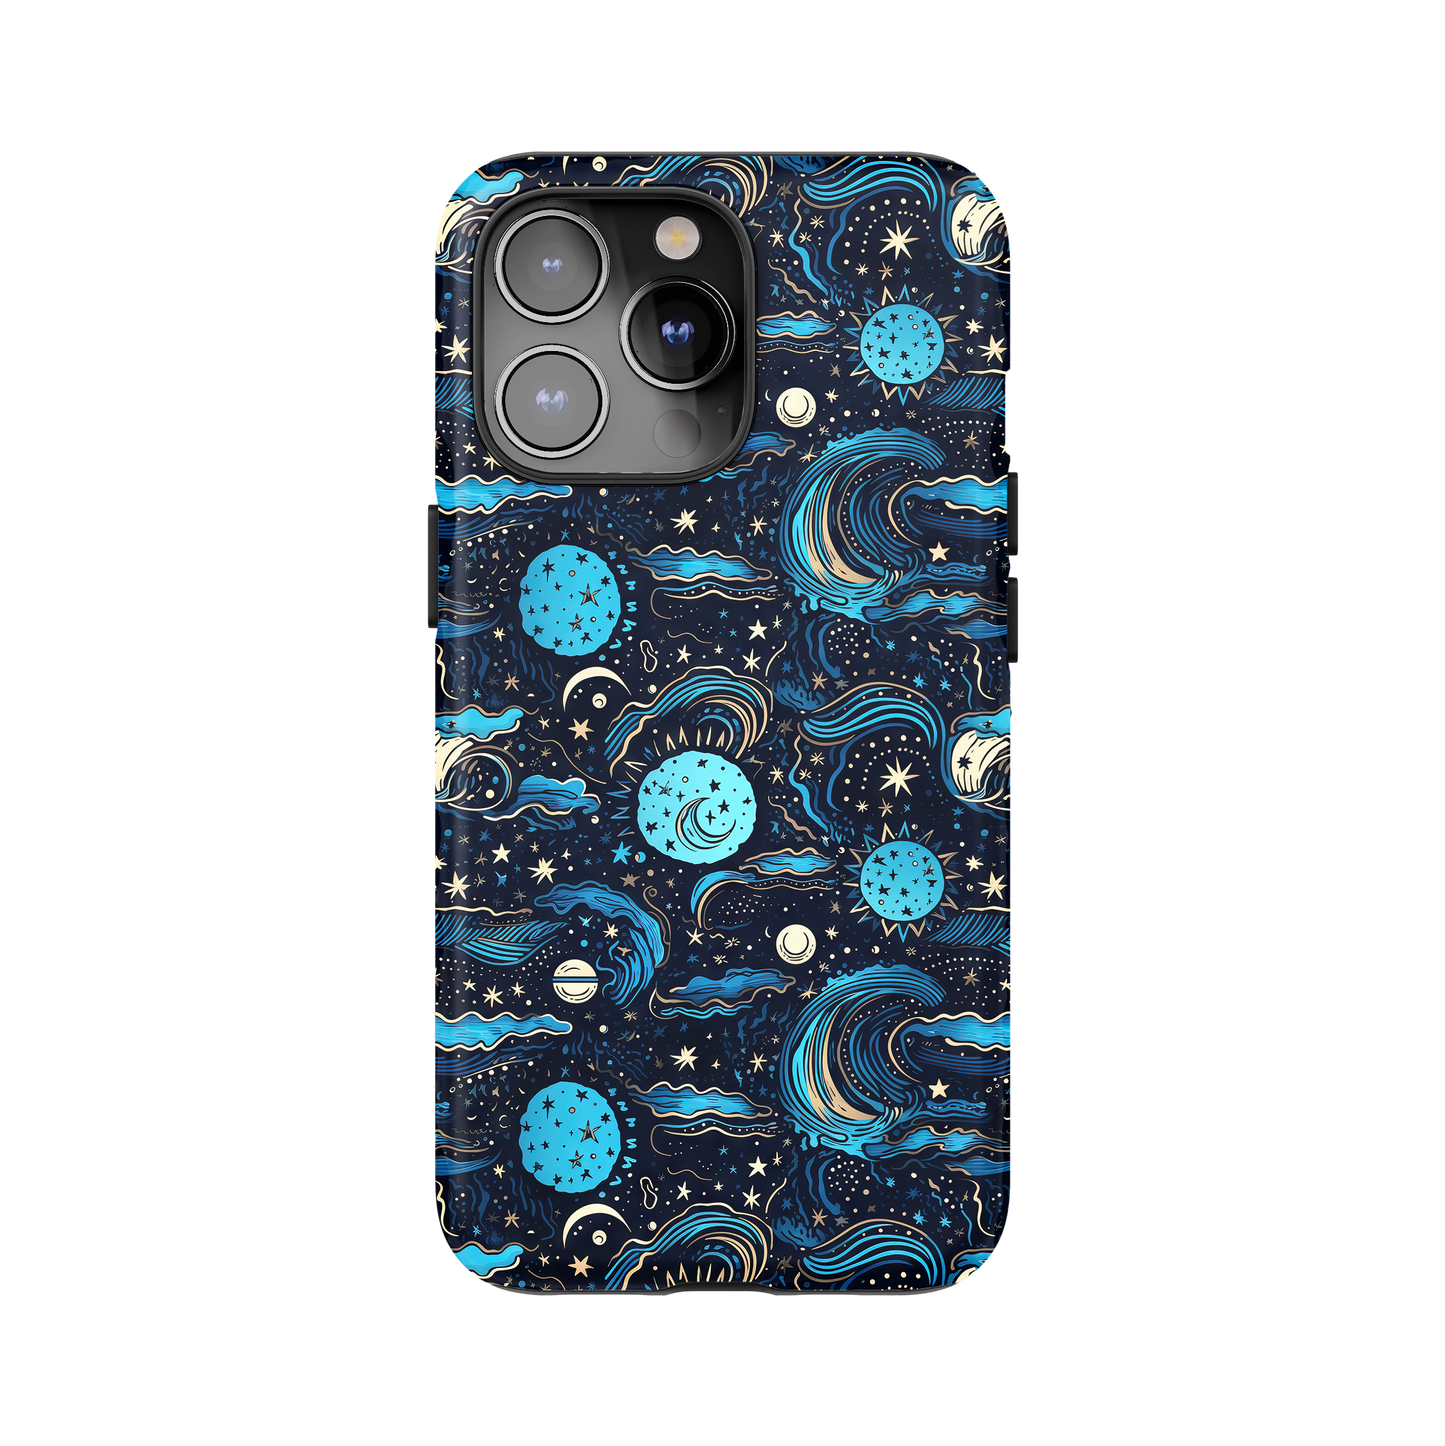 Celestial Moon and Stars Phone Case for iPhone and Samsung